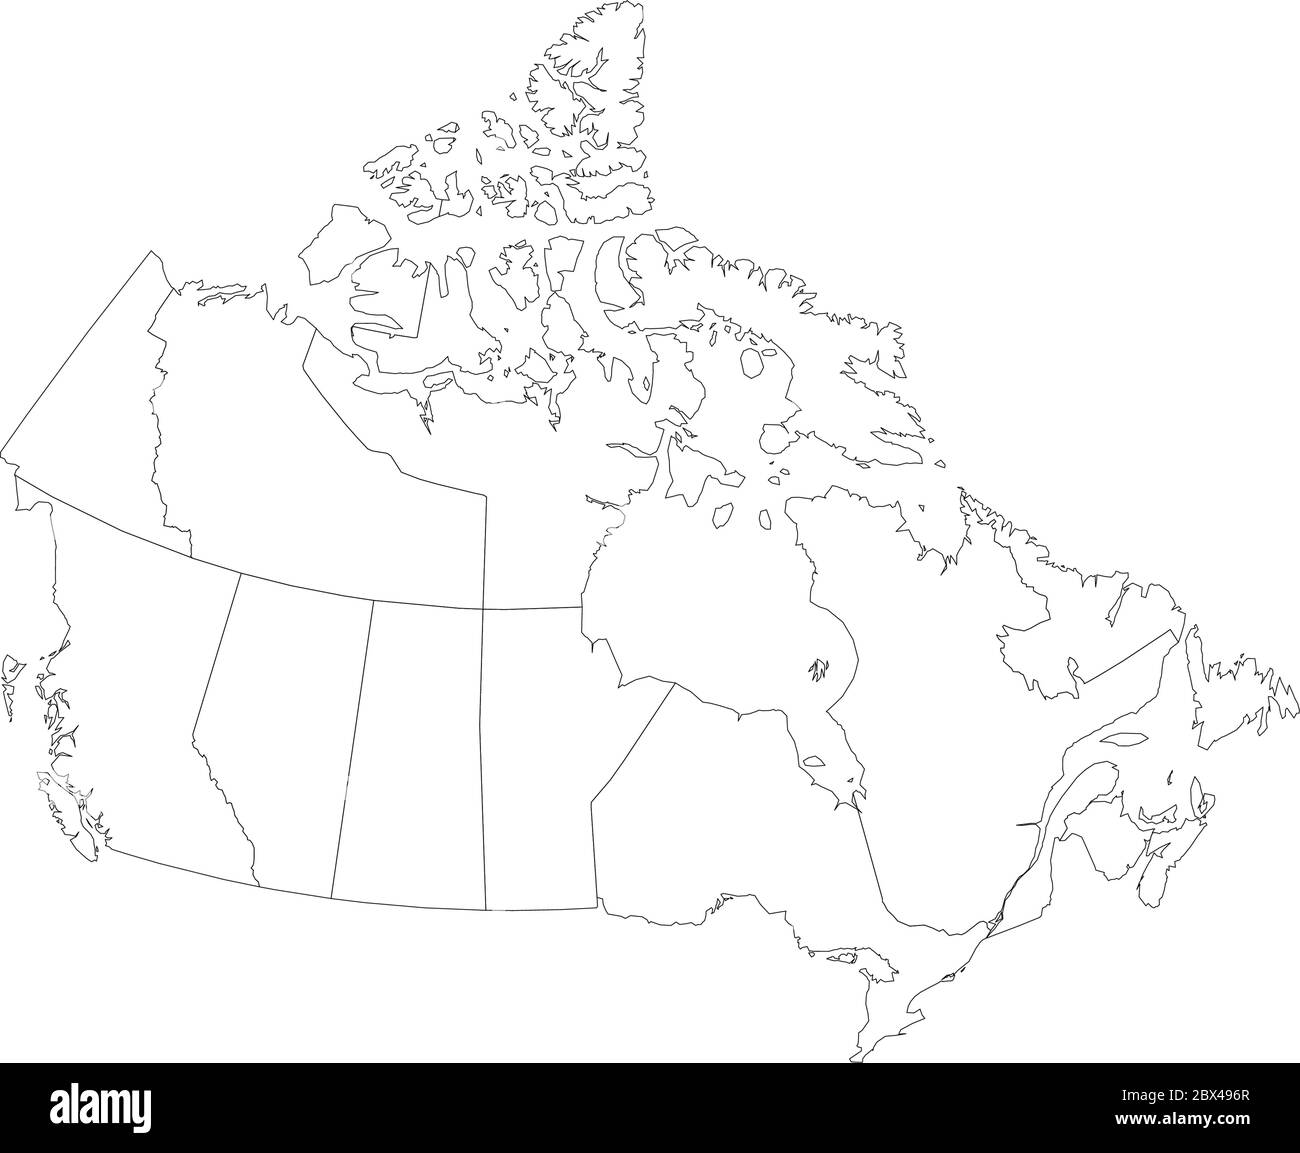 Map of Canada divided into 10 provinces and 3 territories. Administrative regions of Canada. Blank white map with black outline. Vector illustration. Stock Vector